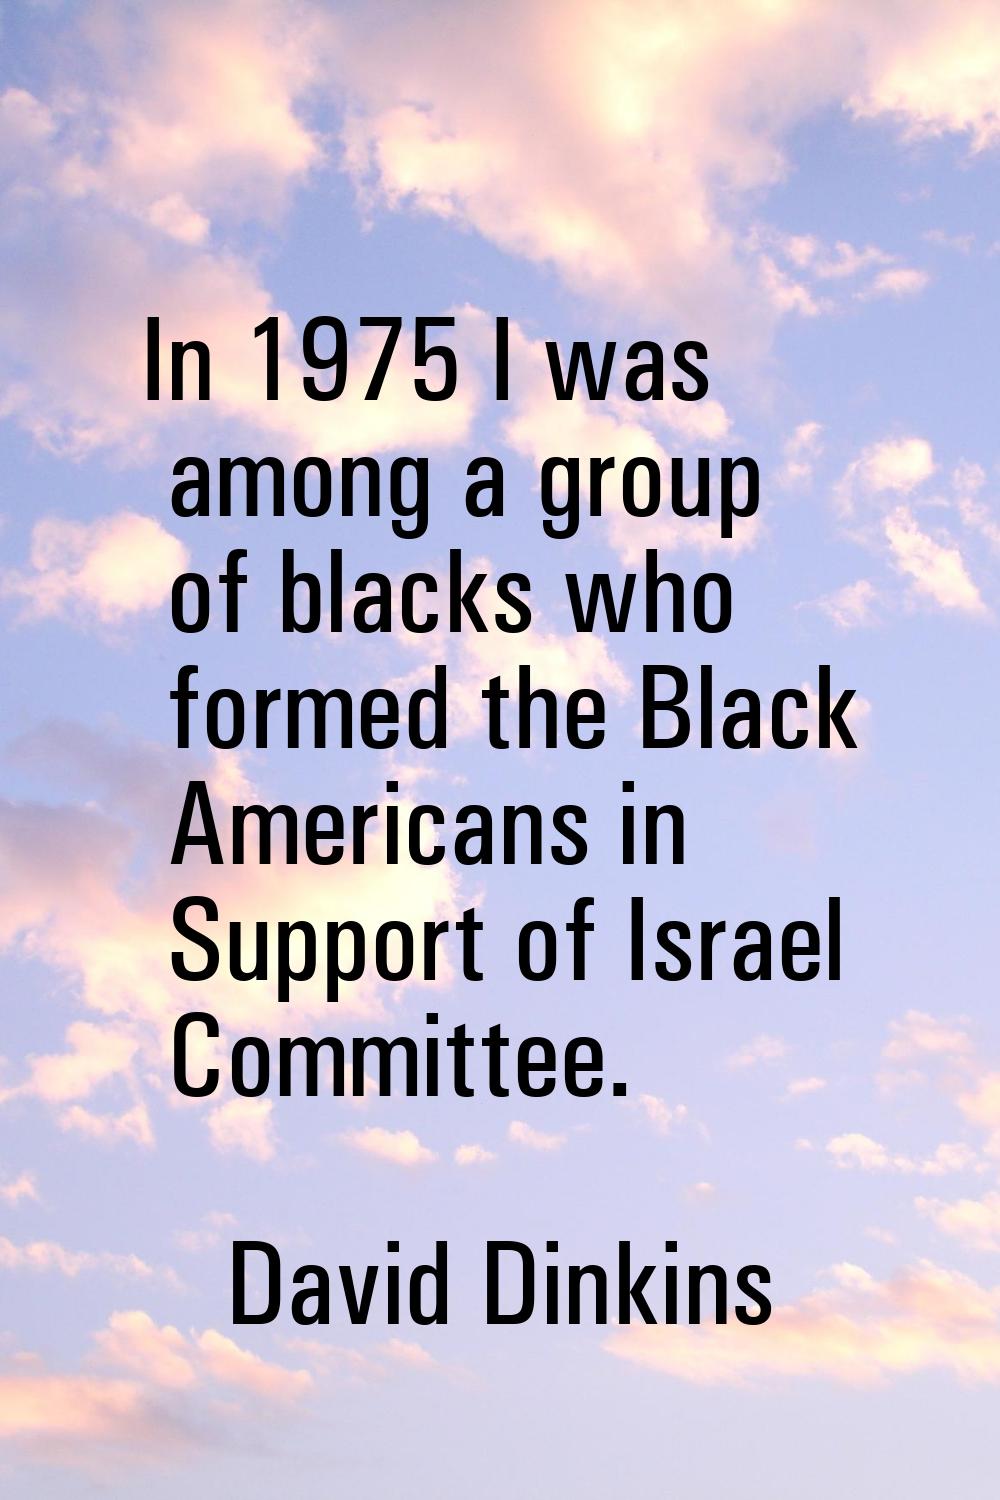 In 1975 I was among a group of blacks who formed the Black Americans in Support of Israel Committee